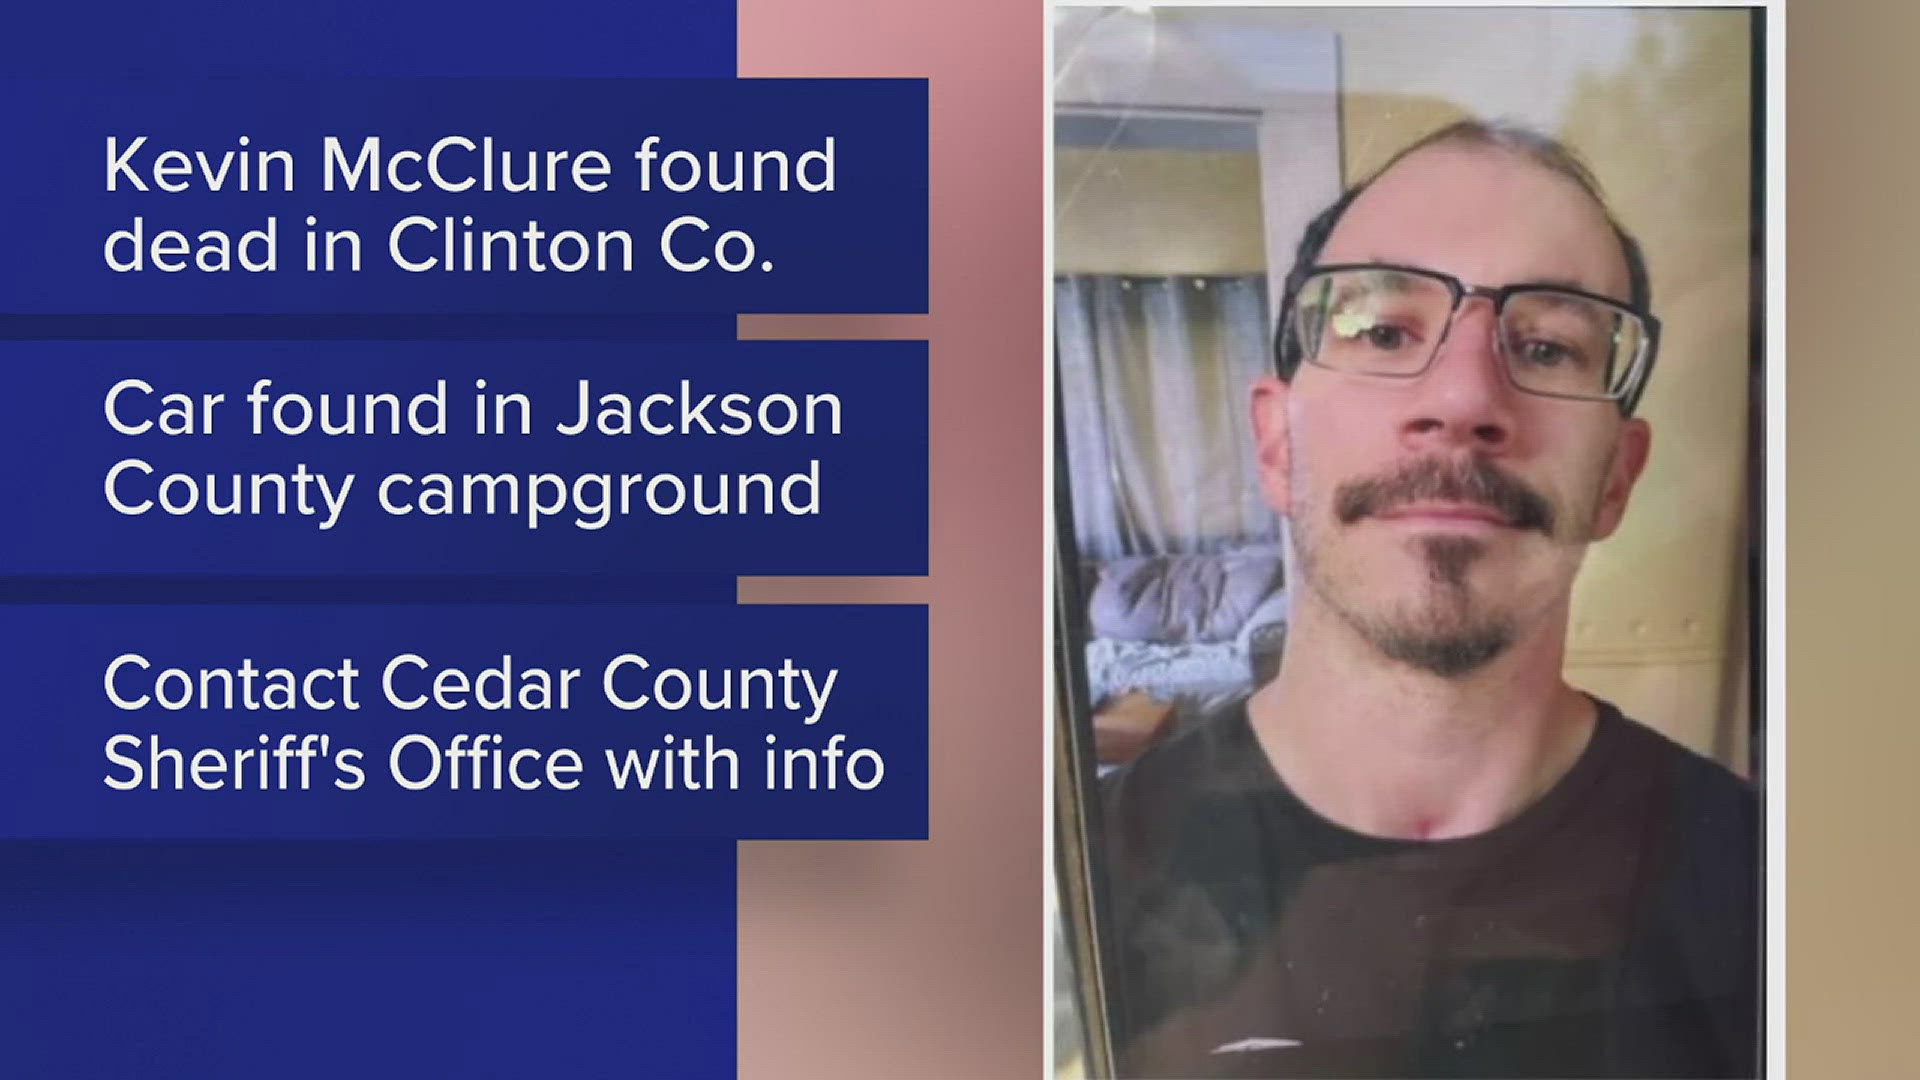 51-year-old Kevin McClure was found dead at the McAndrews Wildlife Area in Clinton County.